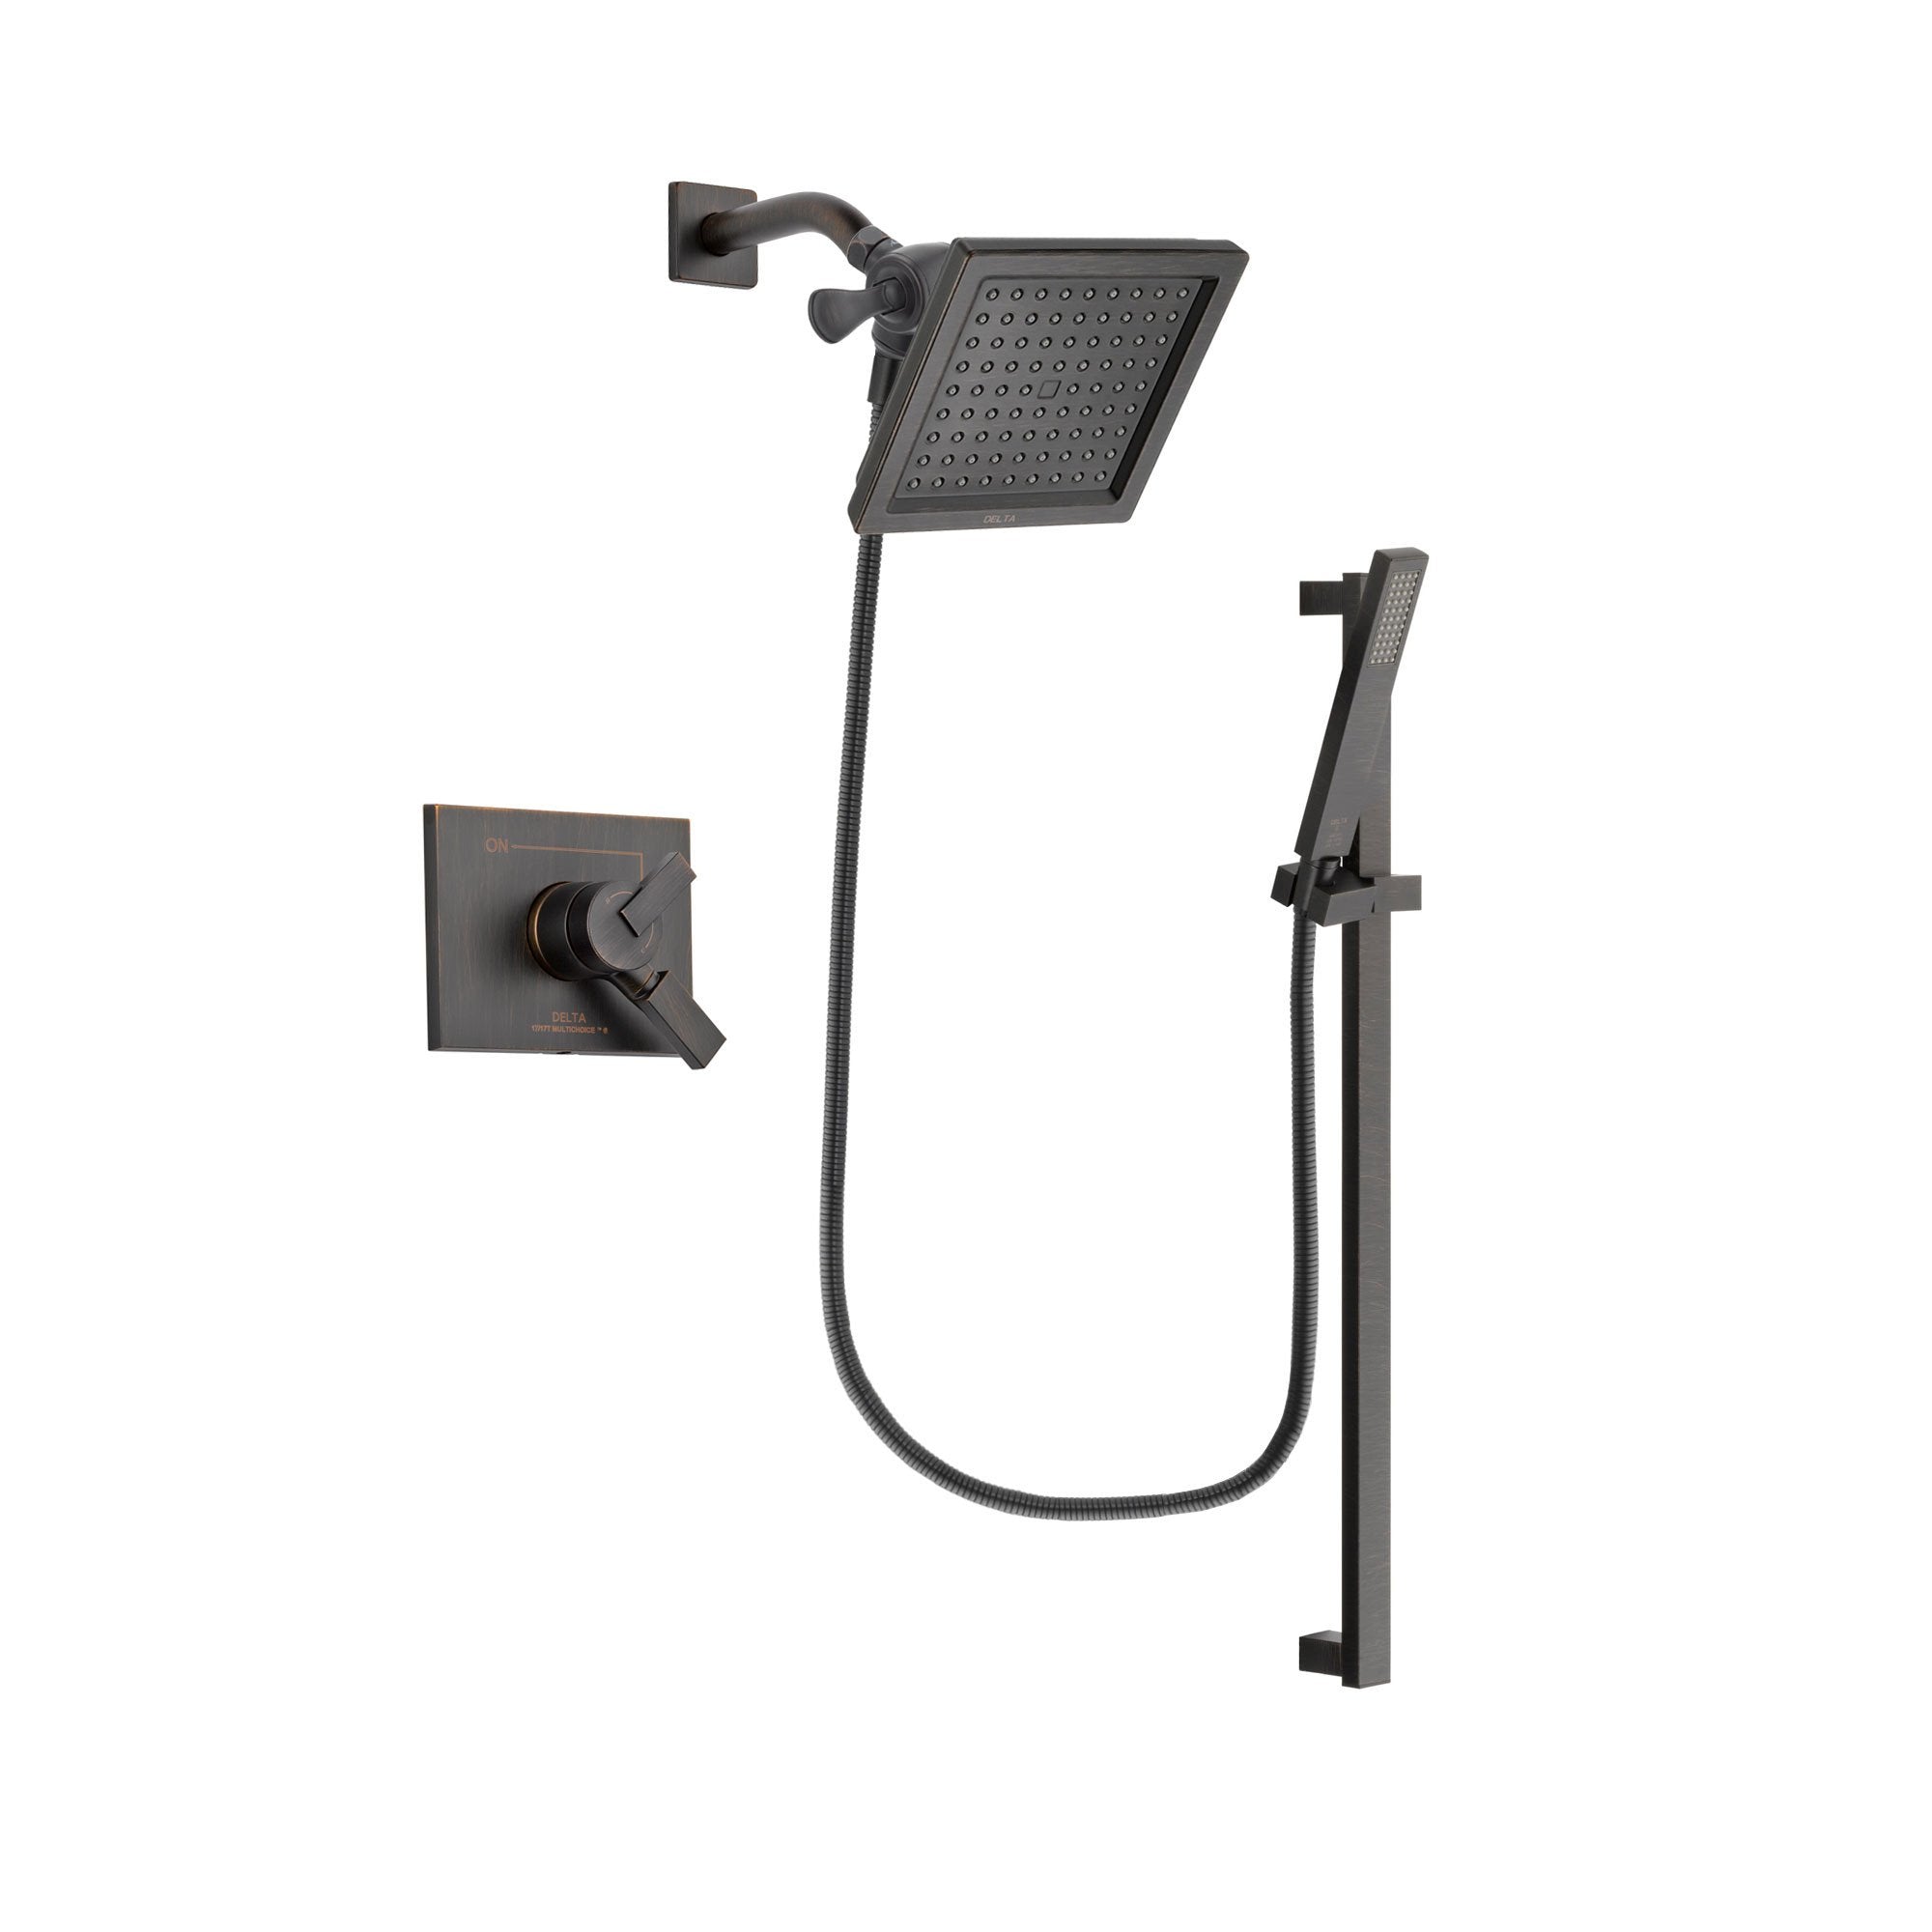 Delta Vero Venetian Bronze Shower Faucet System Package with Hand Spray DSP3196V